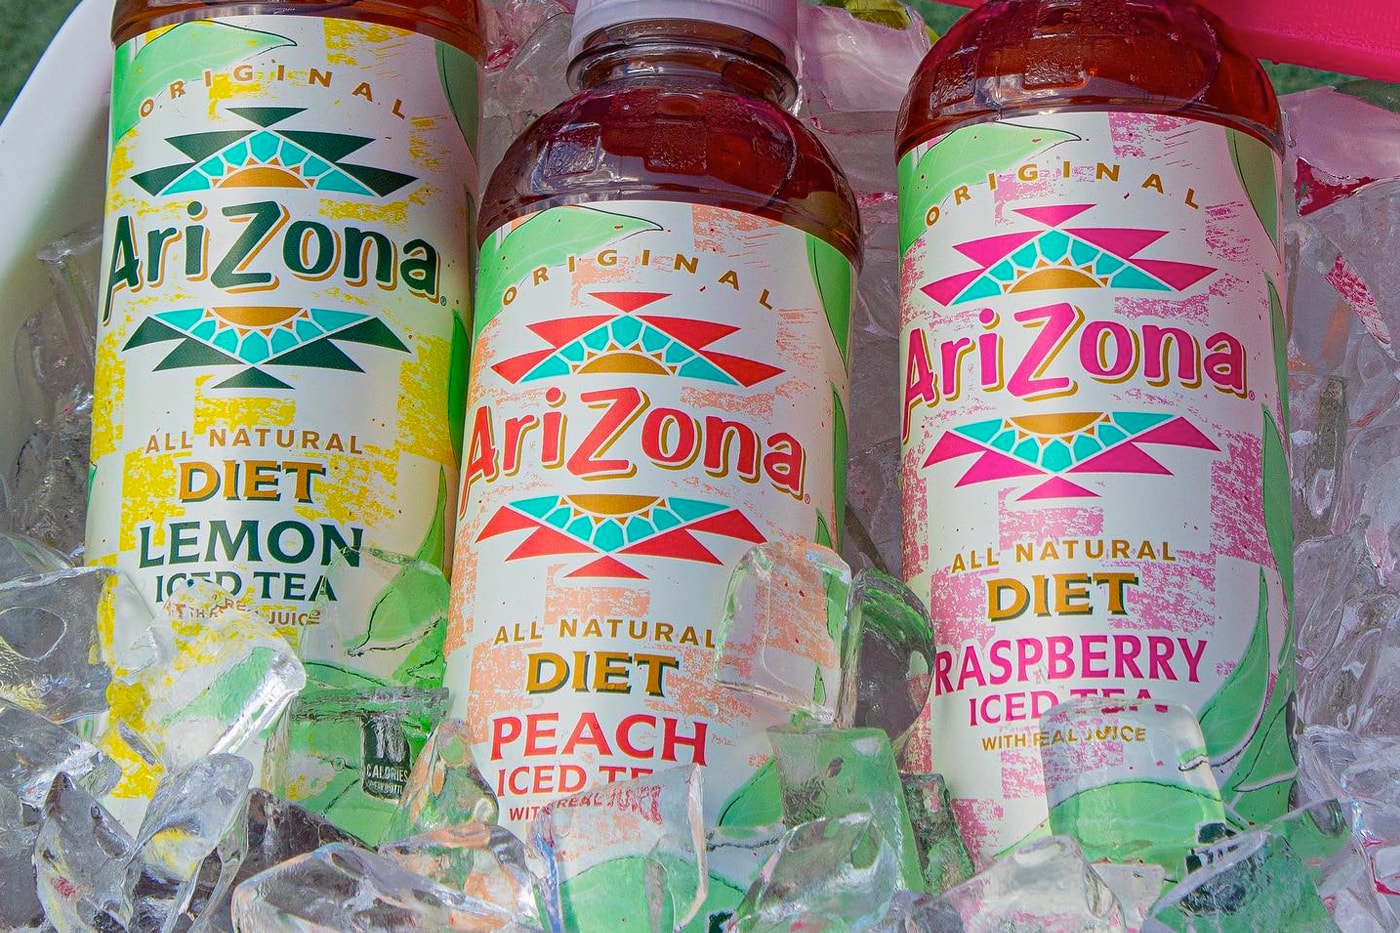 AriZona Iced Tea Founder Says Cans Will Stay $0.99 USD